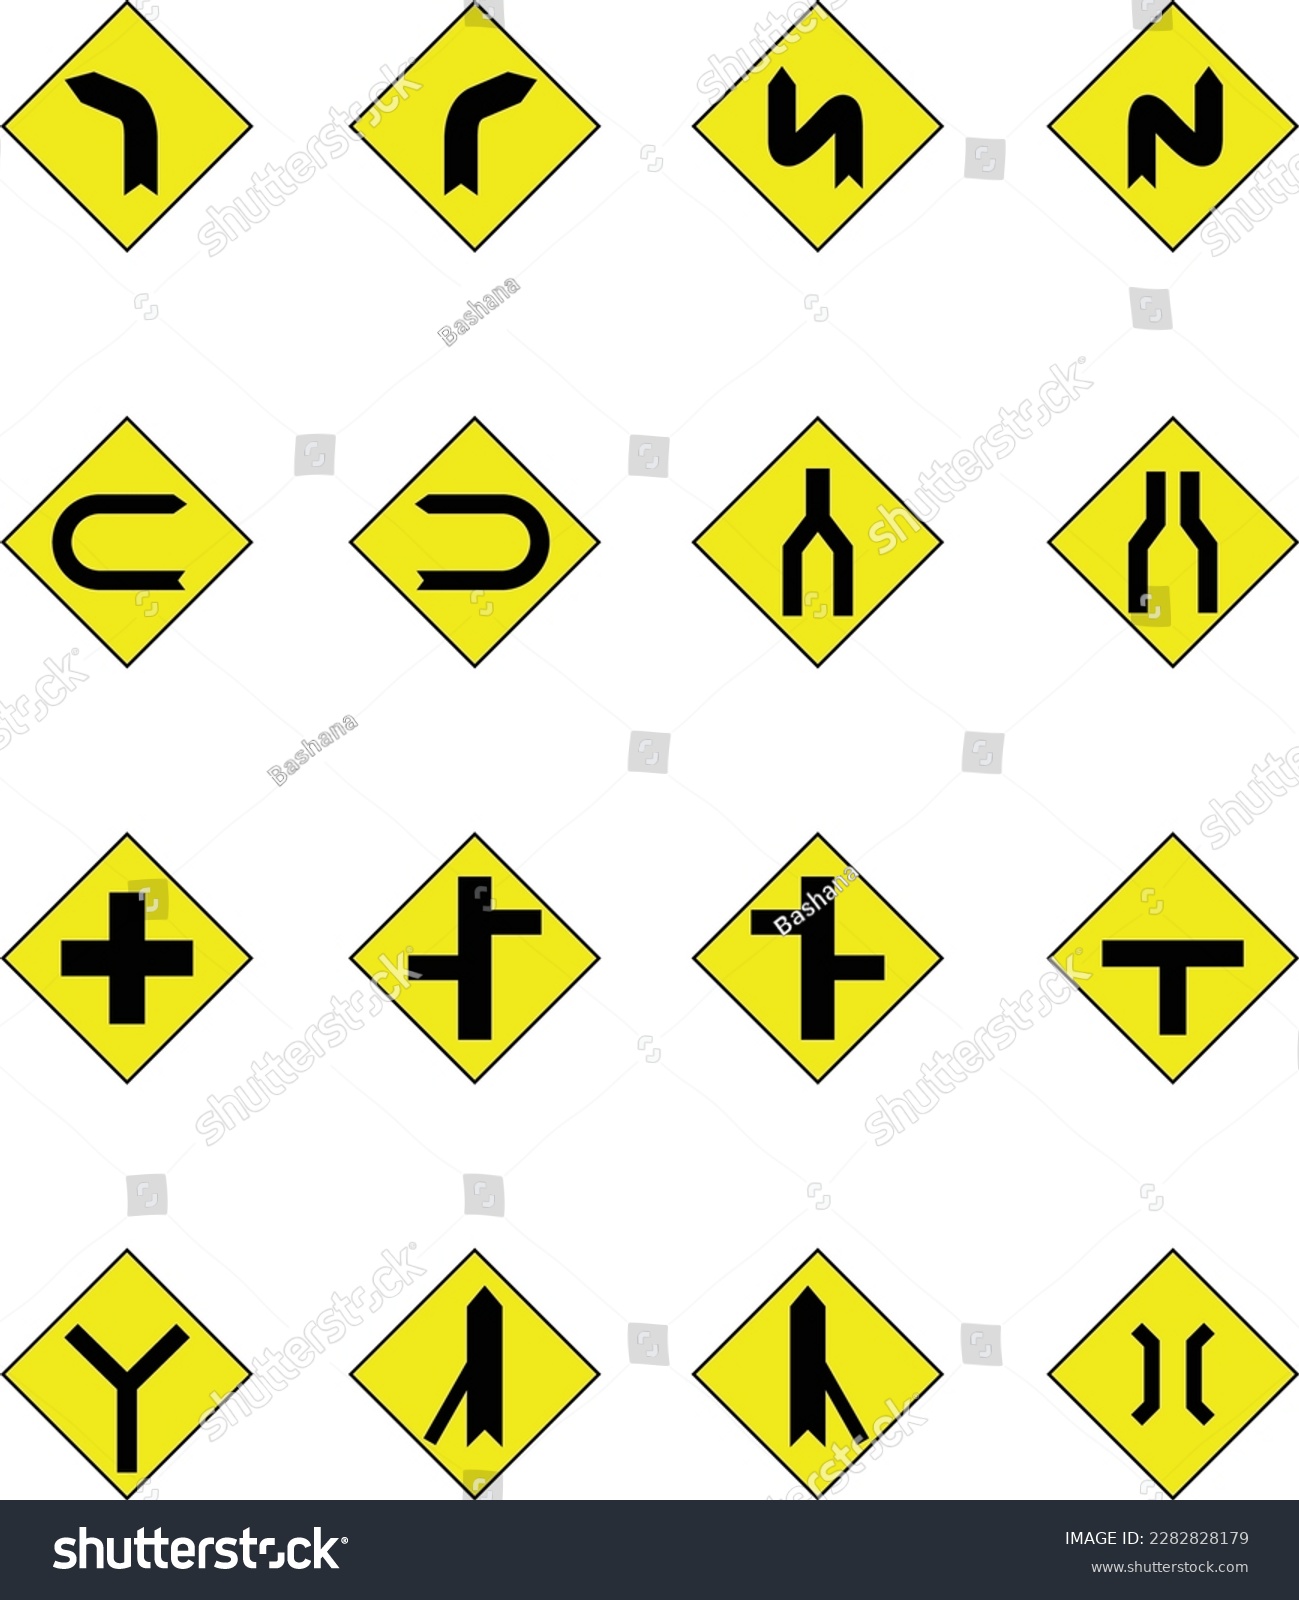 These are the most common road signs which can - Royalty Free Stock ...